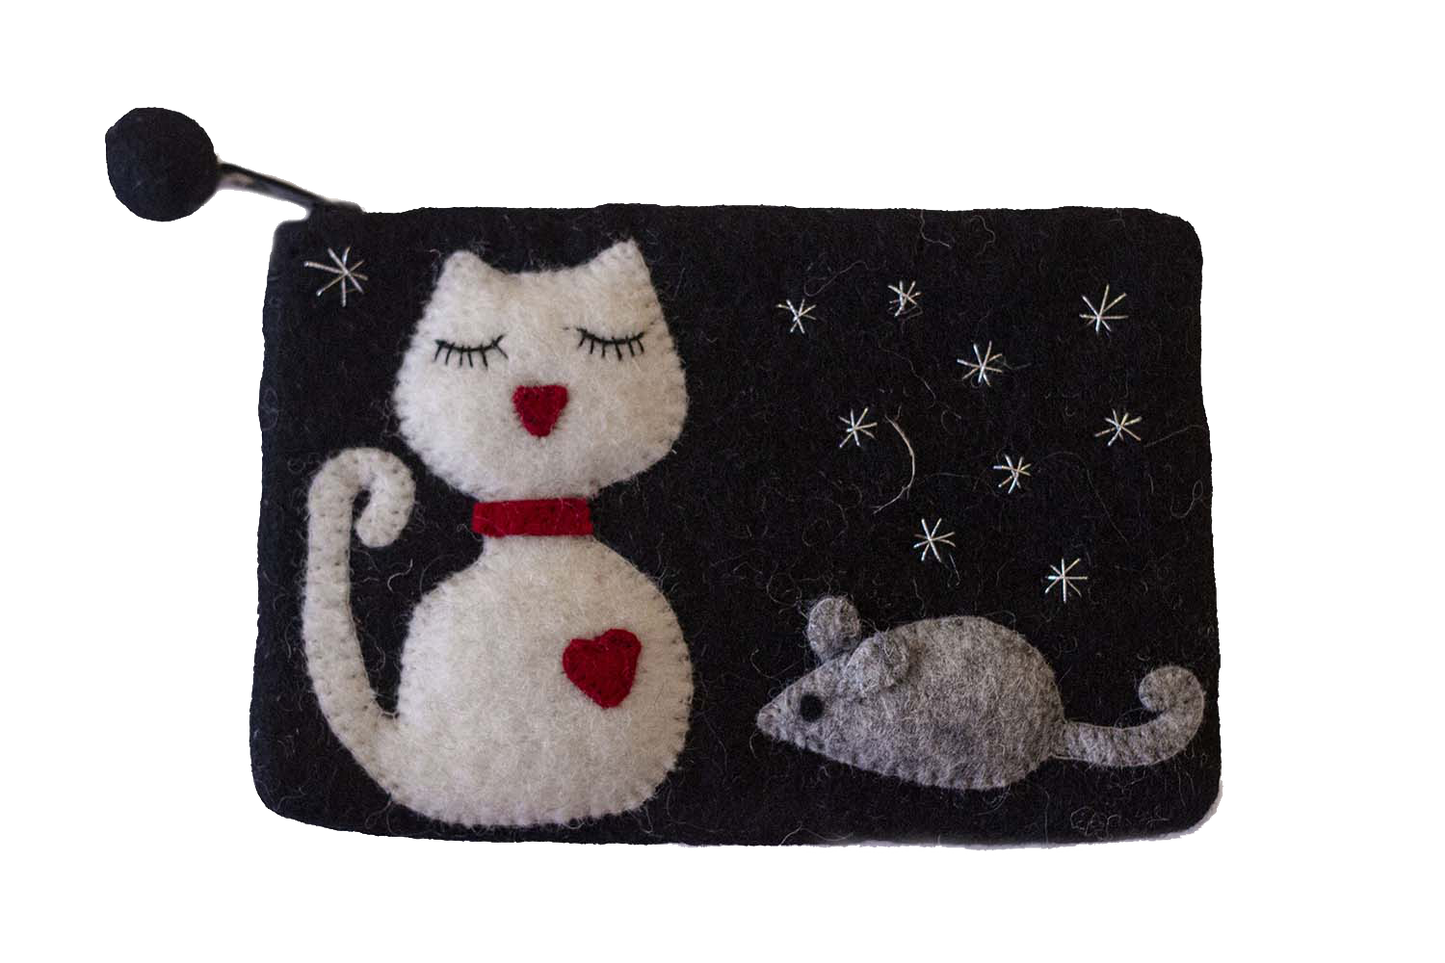 This Global Groove Life, handmade, ethical, fair trade, eco-friendly, sustainable, black felt zipper coin pouch was created by artisans in Kathmandu Nepal and is adorned with an adorable red heart kitty and mouse with stars motif.